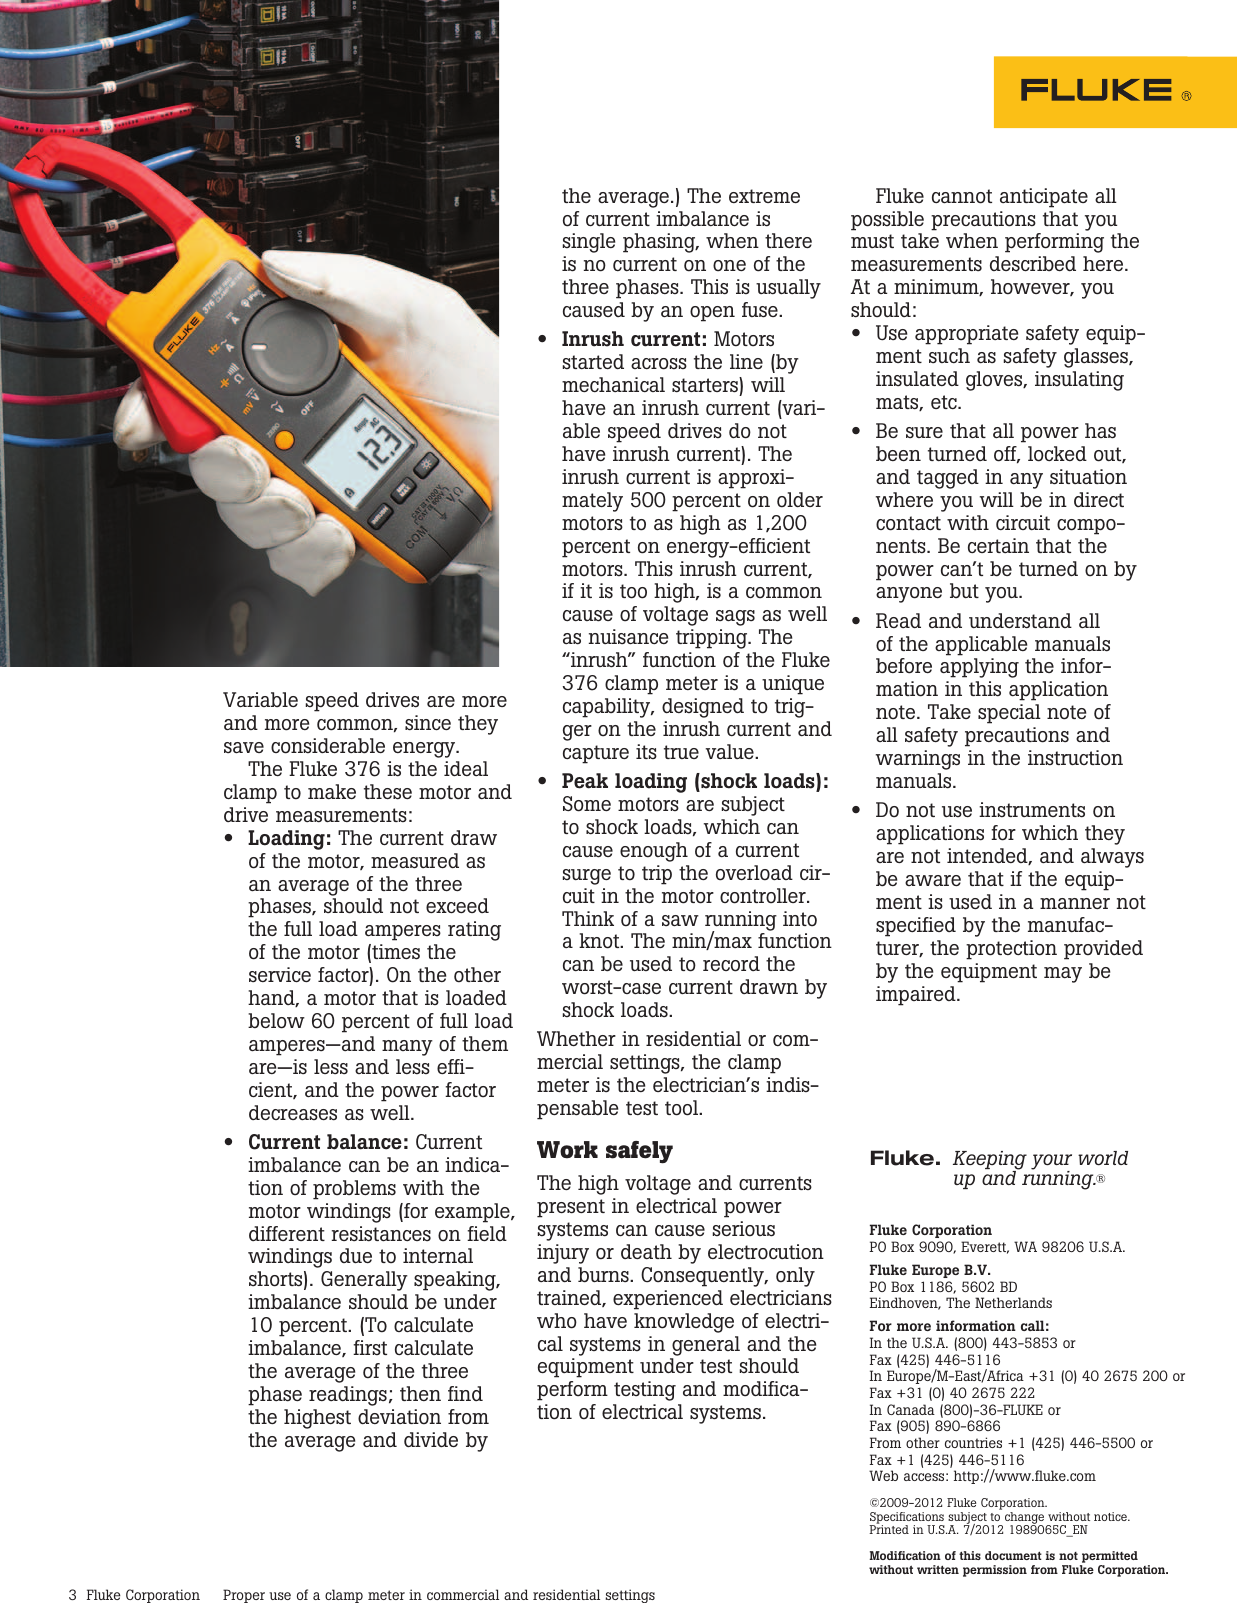 Page 3 of 3 - Fluke Fluke-373-Application-Note- Proper Use Of Clamp Meters In Commercial And Residential Settings  Fluke-373-application-note